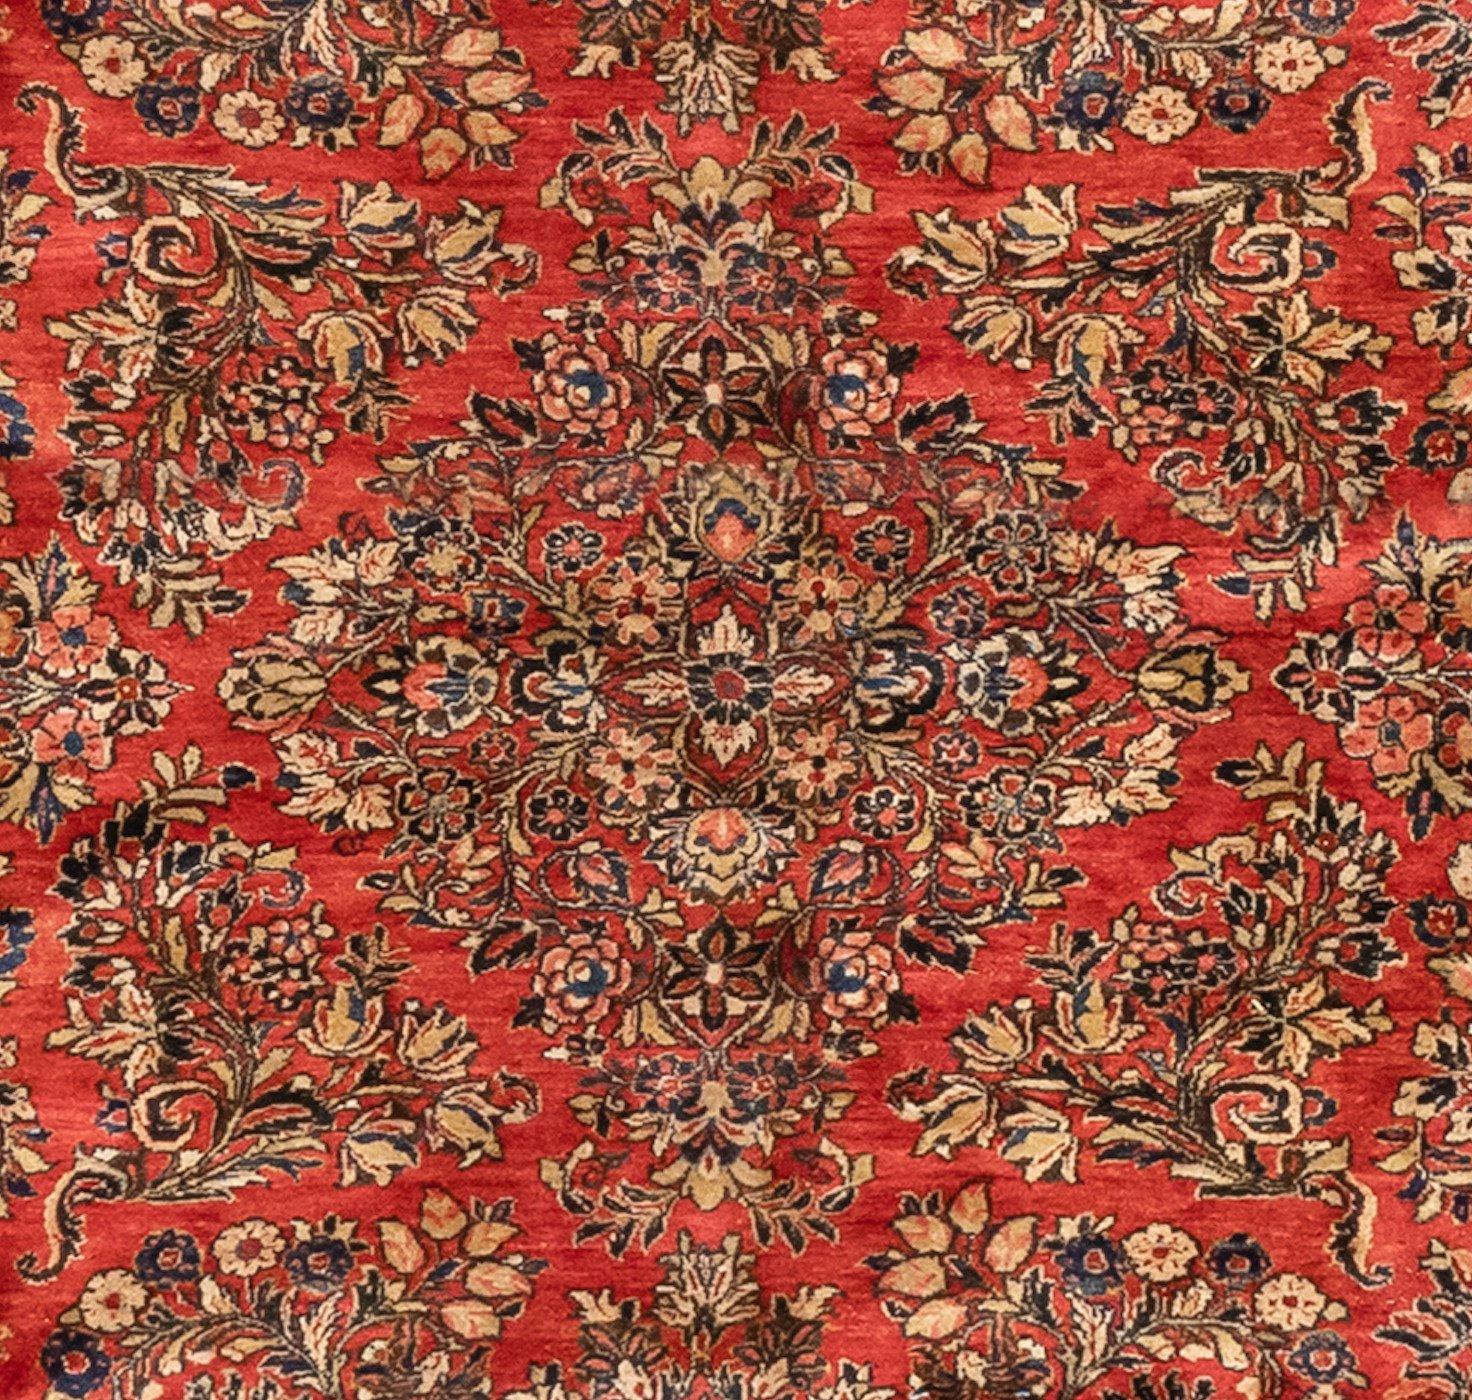 Sarouk is a small village and its neighboring villages in Northwestern Iran. Most Sarouk carpets follow a very distinctive design and is depended on floral sprays and bouquets. 

This is a fine example of an oversize antique Sarouk carpet dating